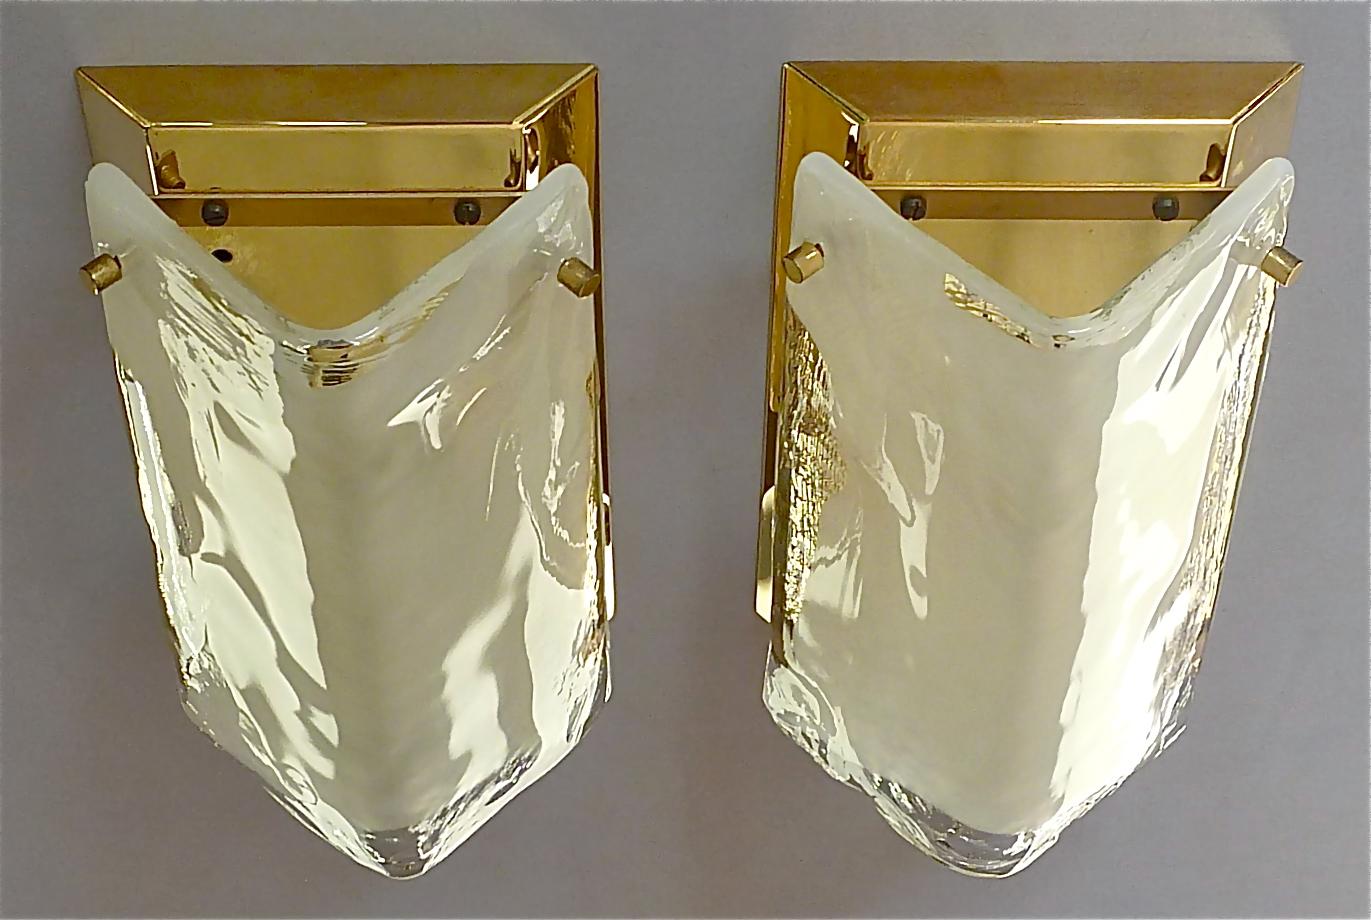 Hand-Crafted Signed Pair of J.T. Kalmar Sconces Gilt Brass White Murano Glass Austria, 1970s For Sale